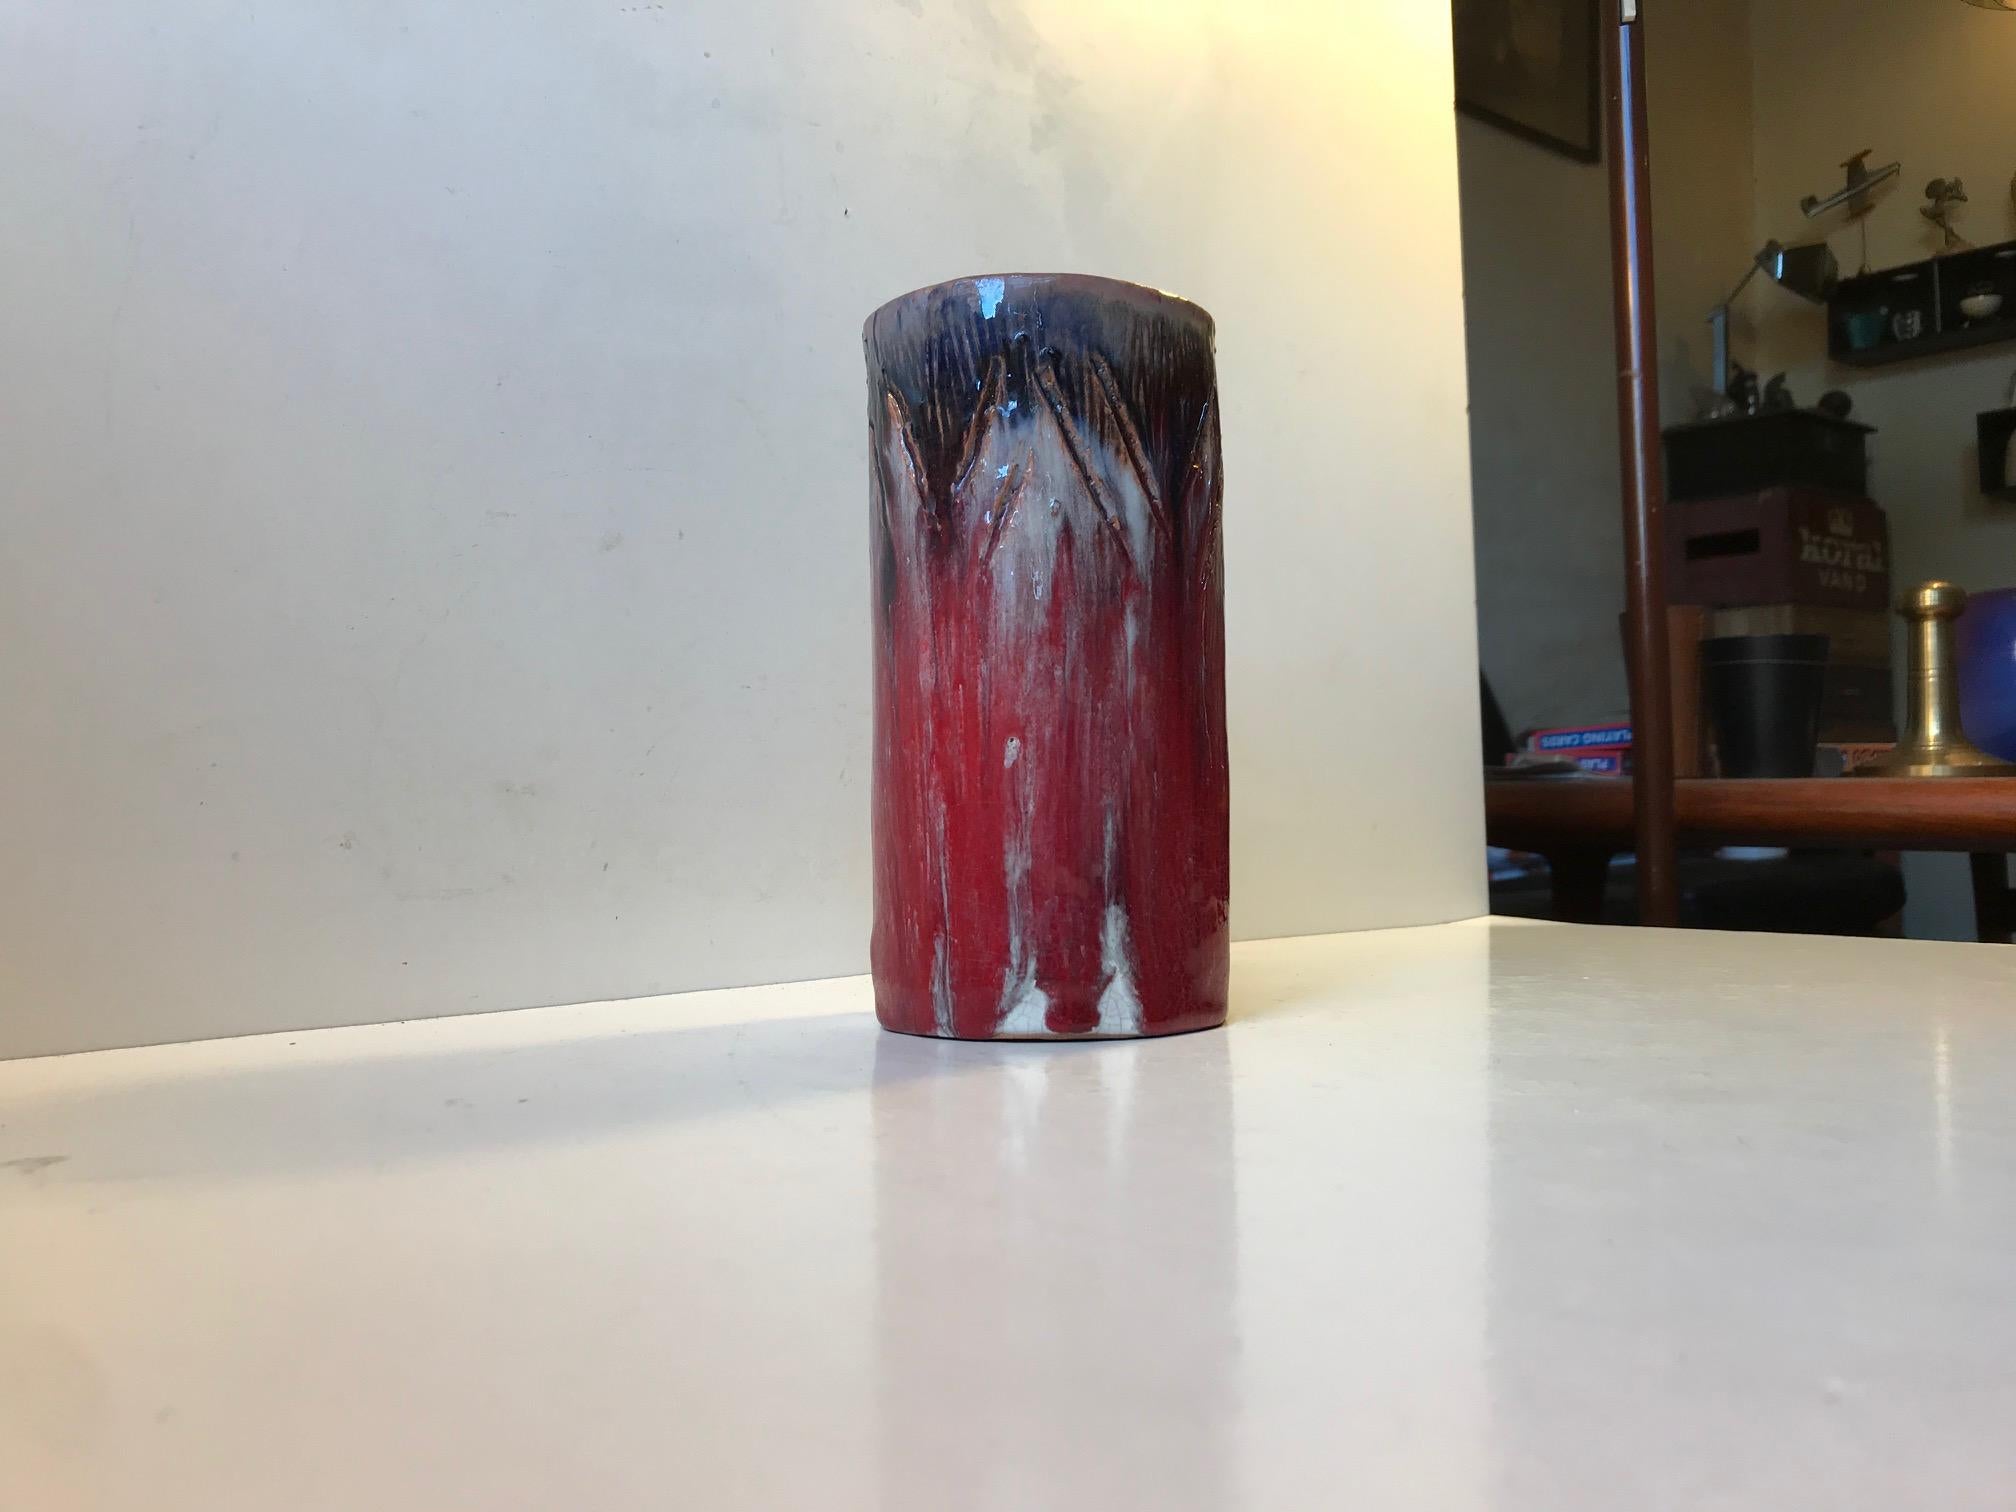 Unique Danish Cylindrical Ceramic Vase in Oxblood and Drip Glaze, 1960s In Good Condition For Sale In Esbjerg, DK